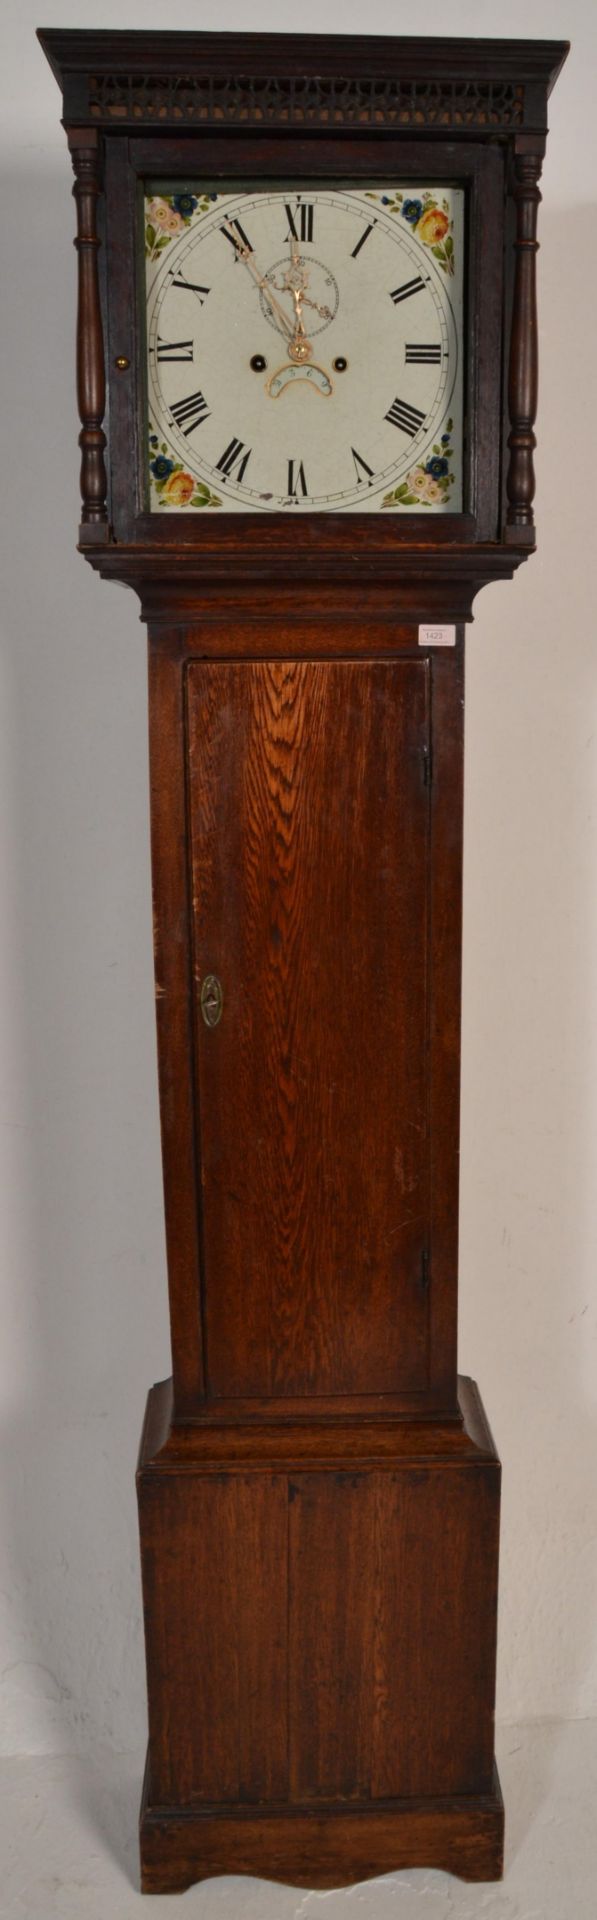 A 19th Century oak cased grandfather / longcase clock having a painted face with floral decoration